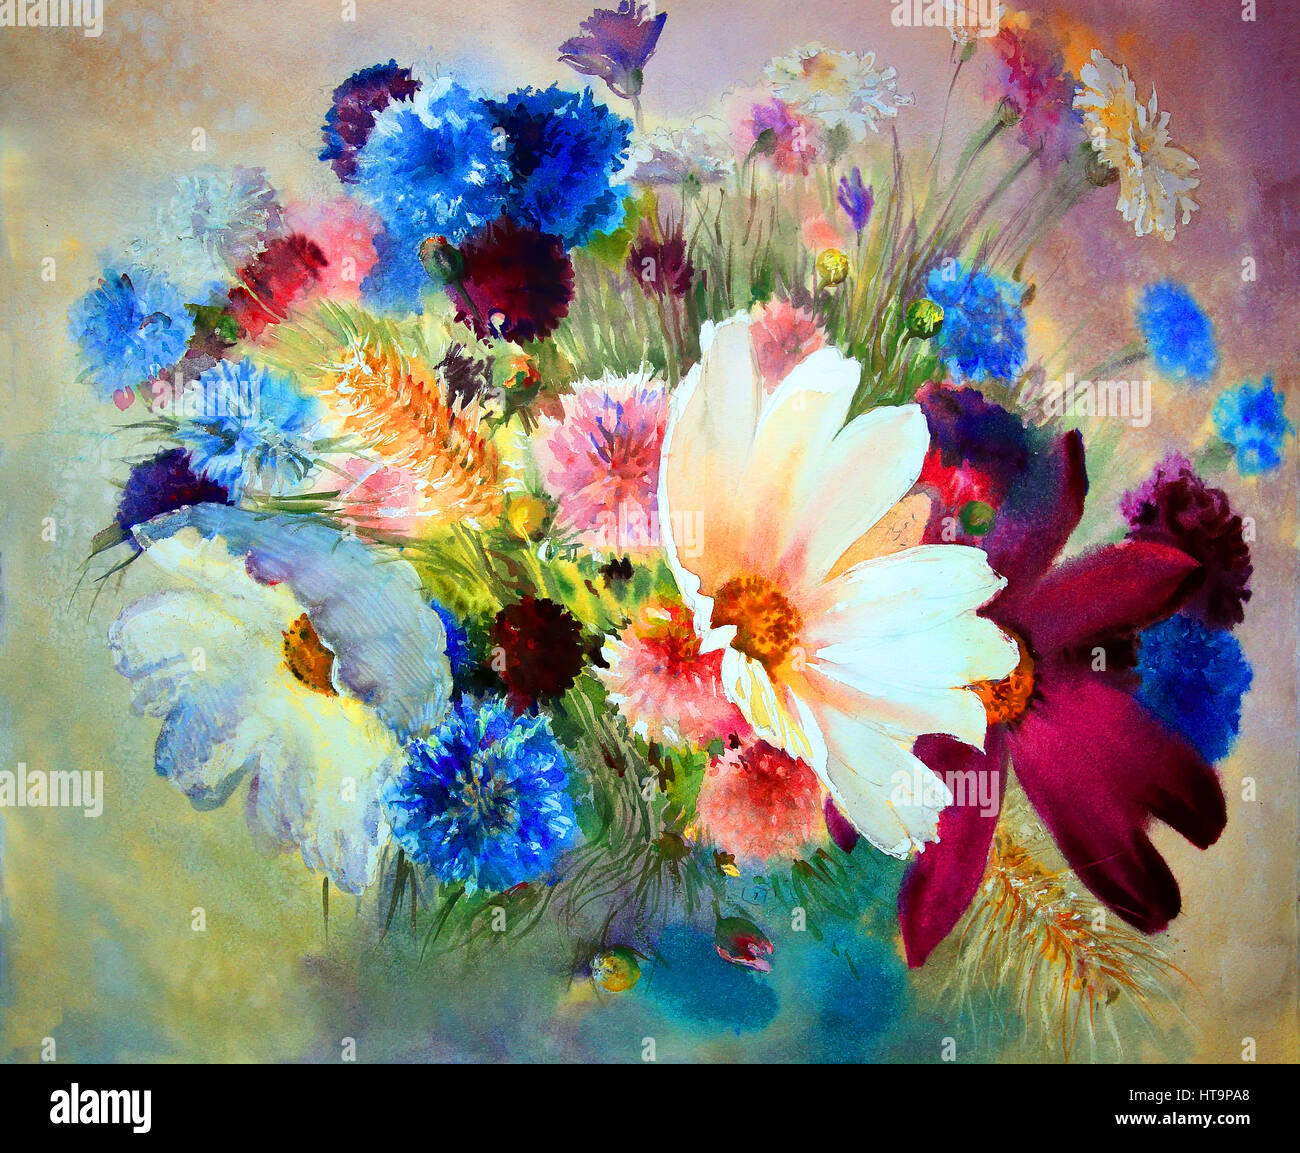 Watercolor painting of the beautiful flowers Stock Photo - Alamy